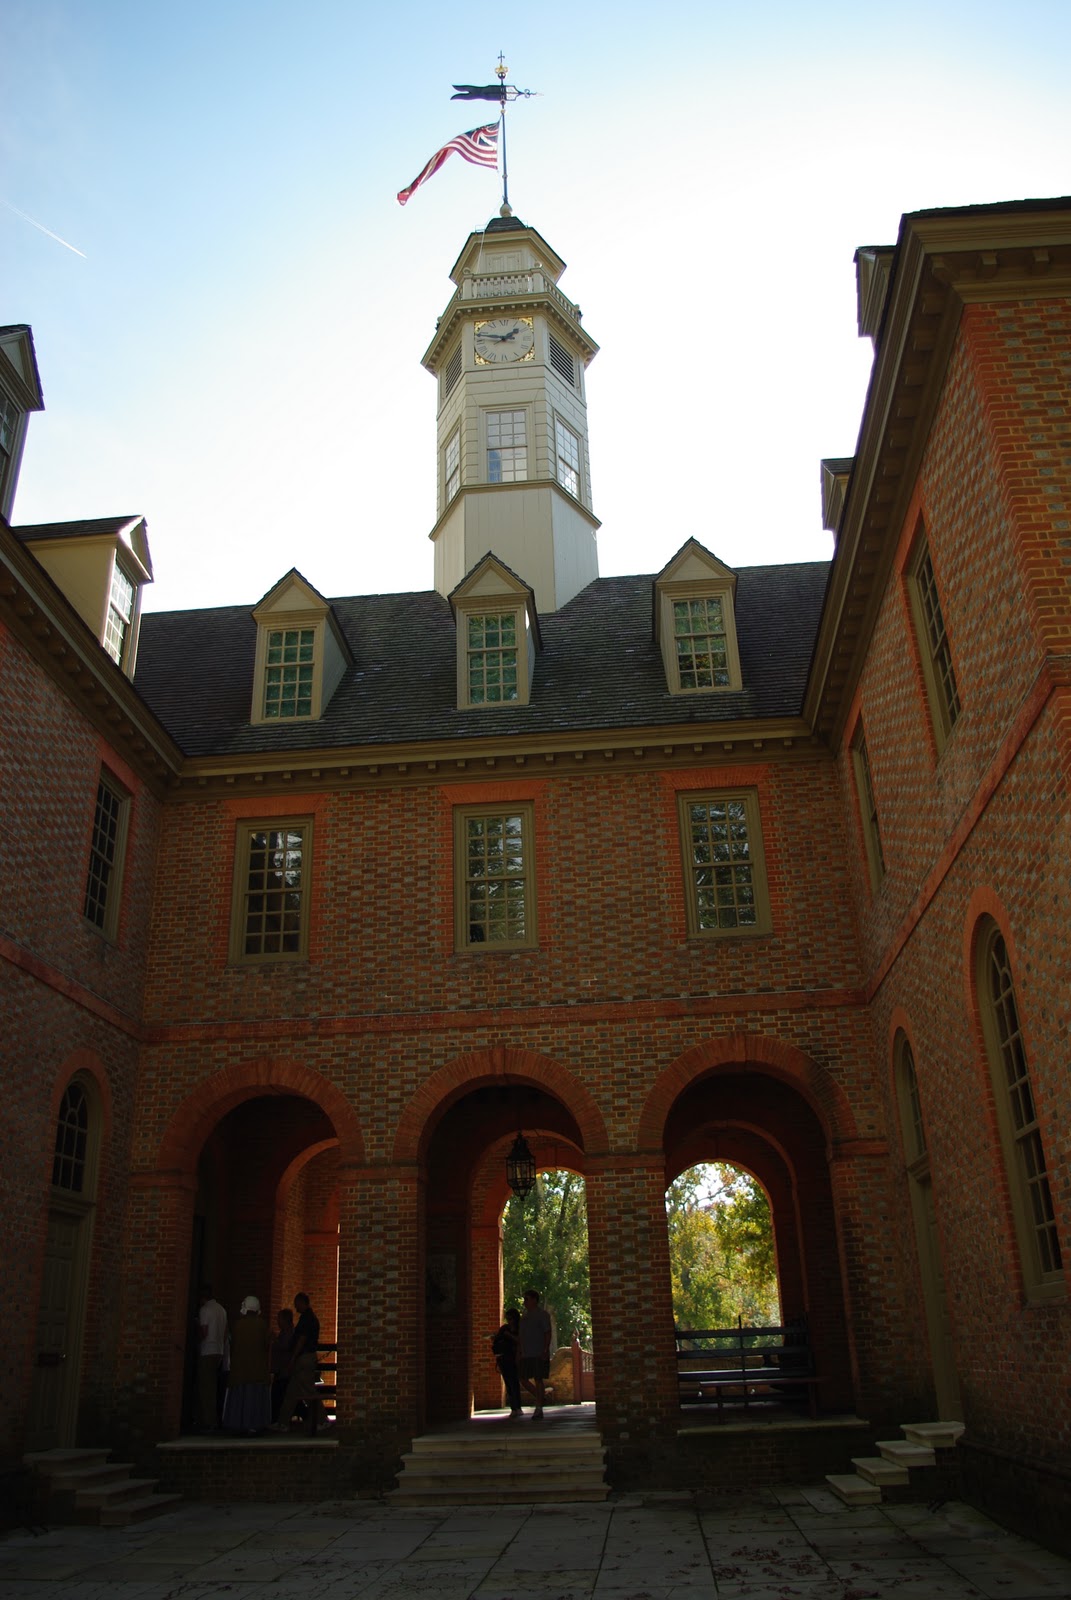 tales from the Drivers' seat: Jamestown and Colonial Williamsburg Virginia